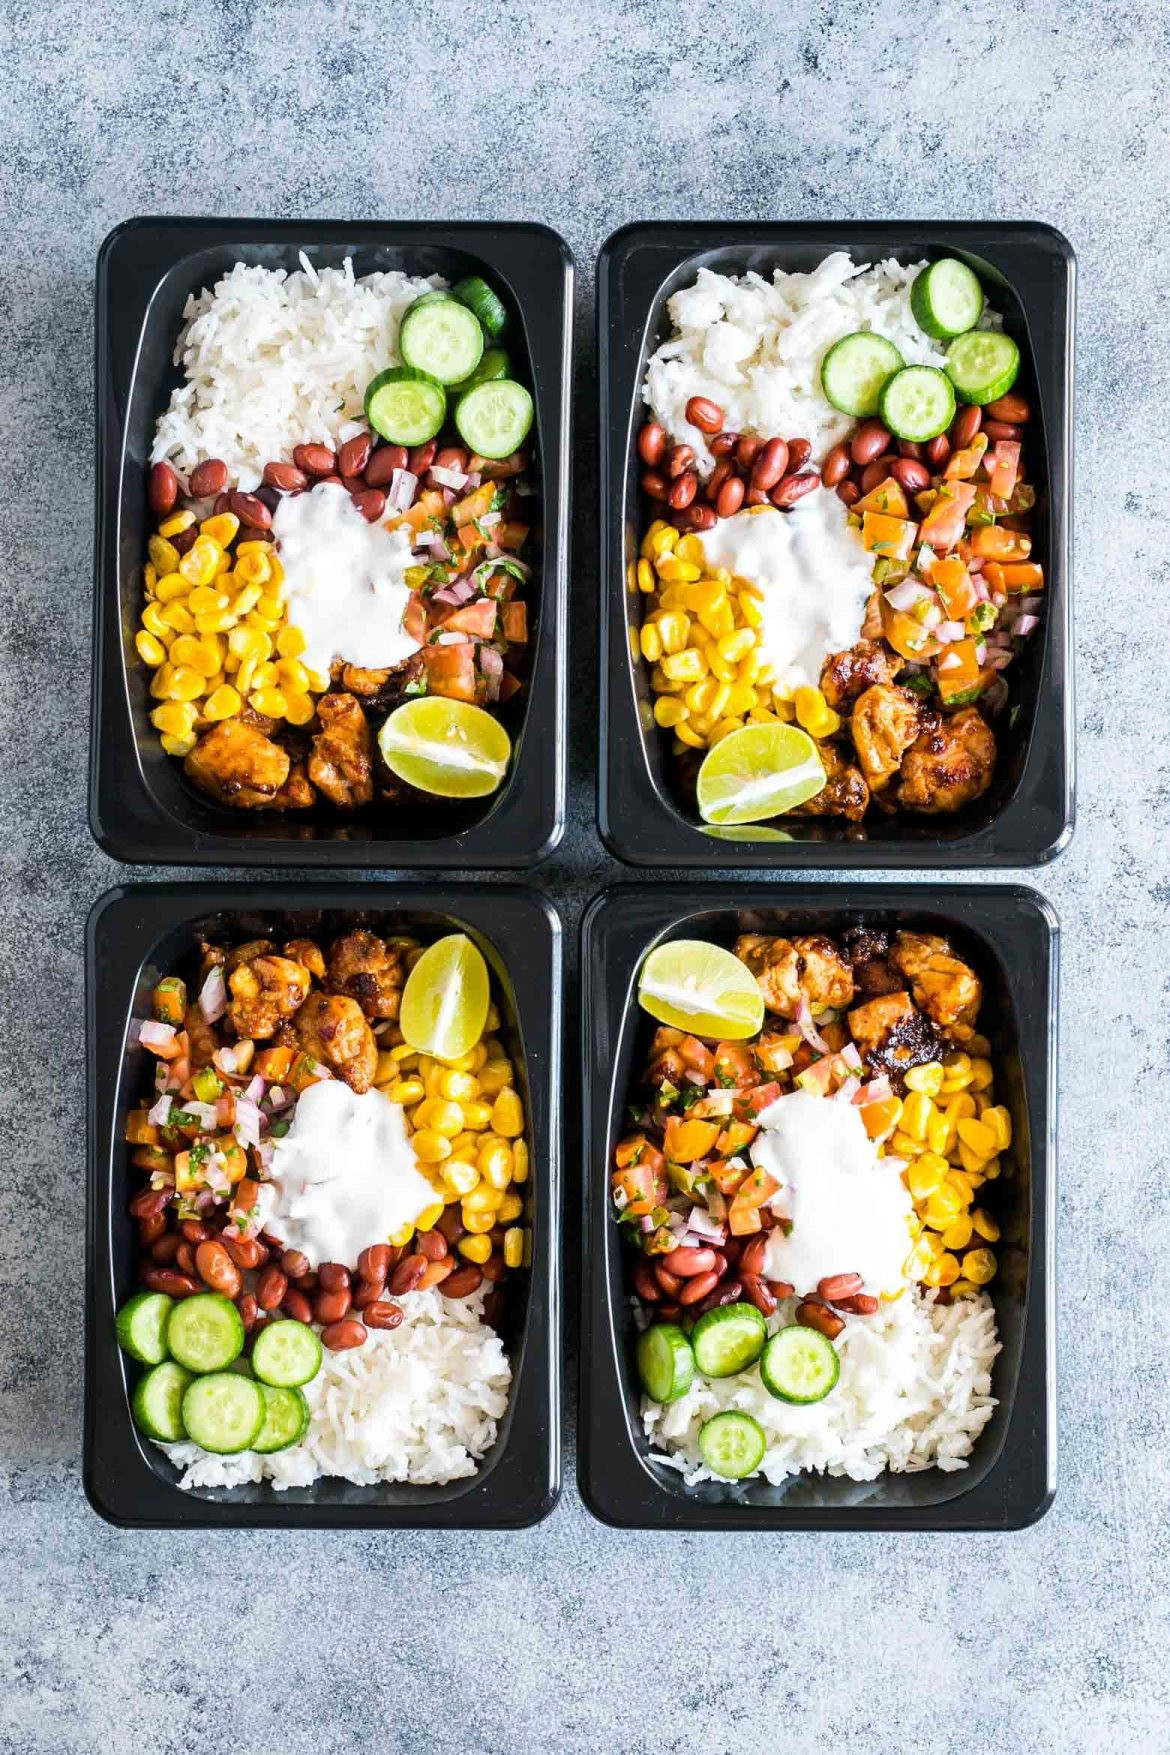 Dinners For The Week Ideas
 10 Meal Prep Ideas for the Week That Are Healthy & Delicious